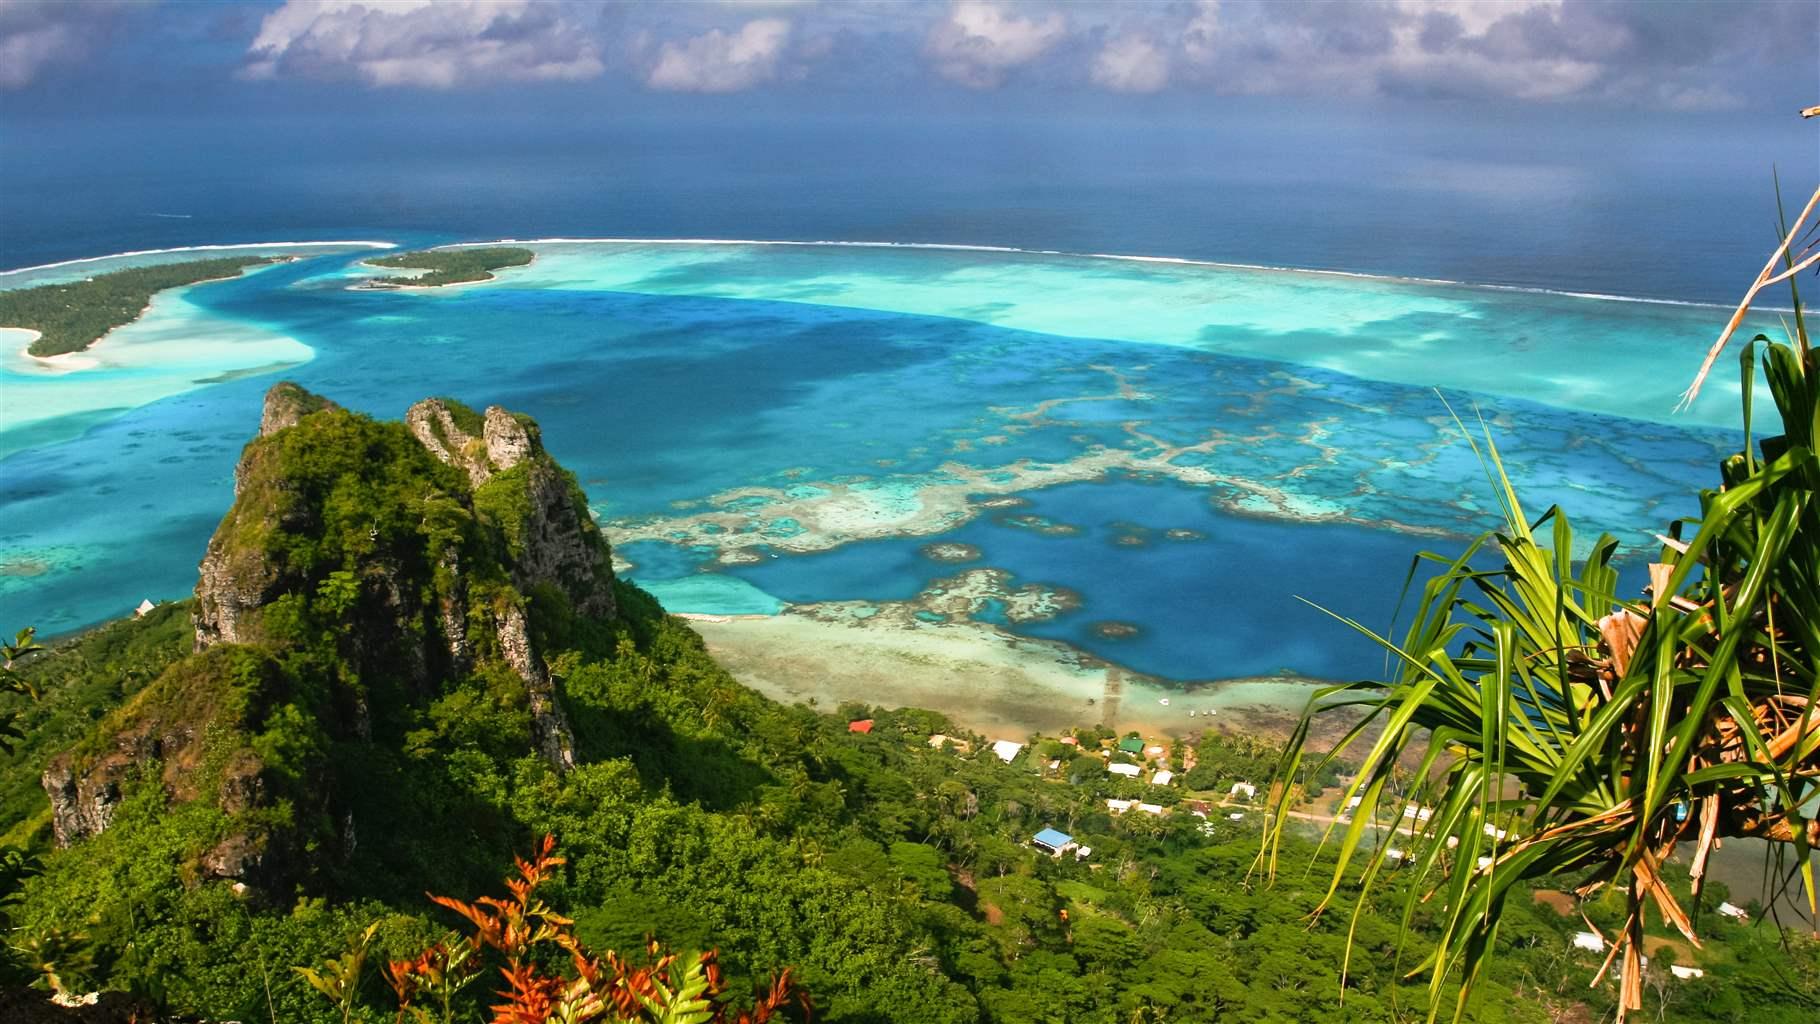 Images from waters in French Polynesia. Scenic view of coral reef, Maupiti, French Polynesia